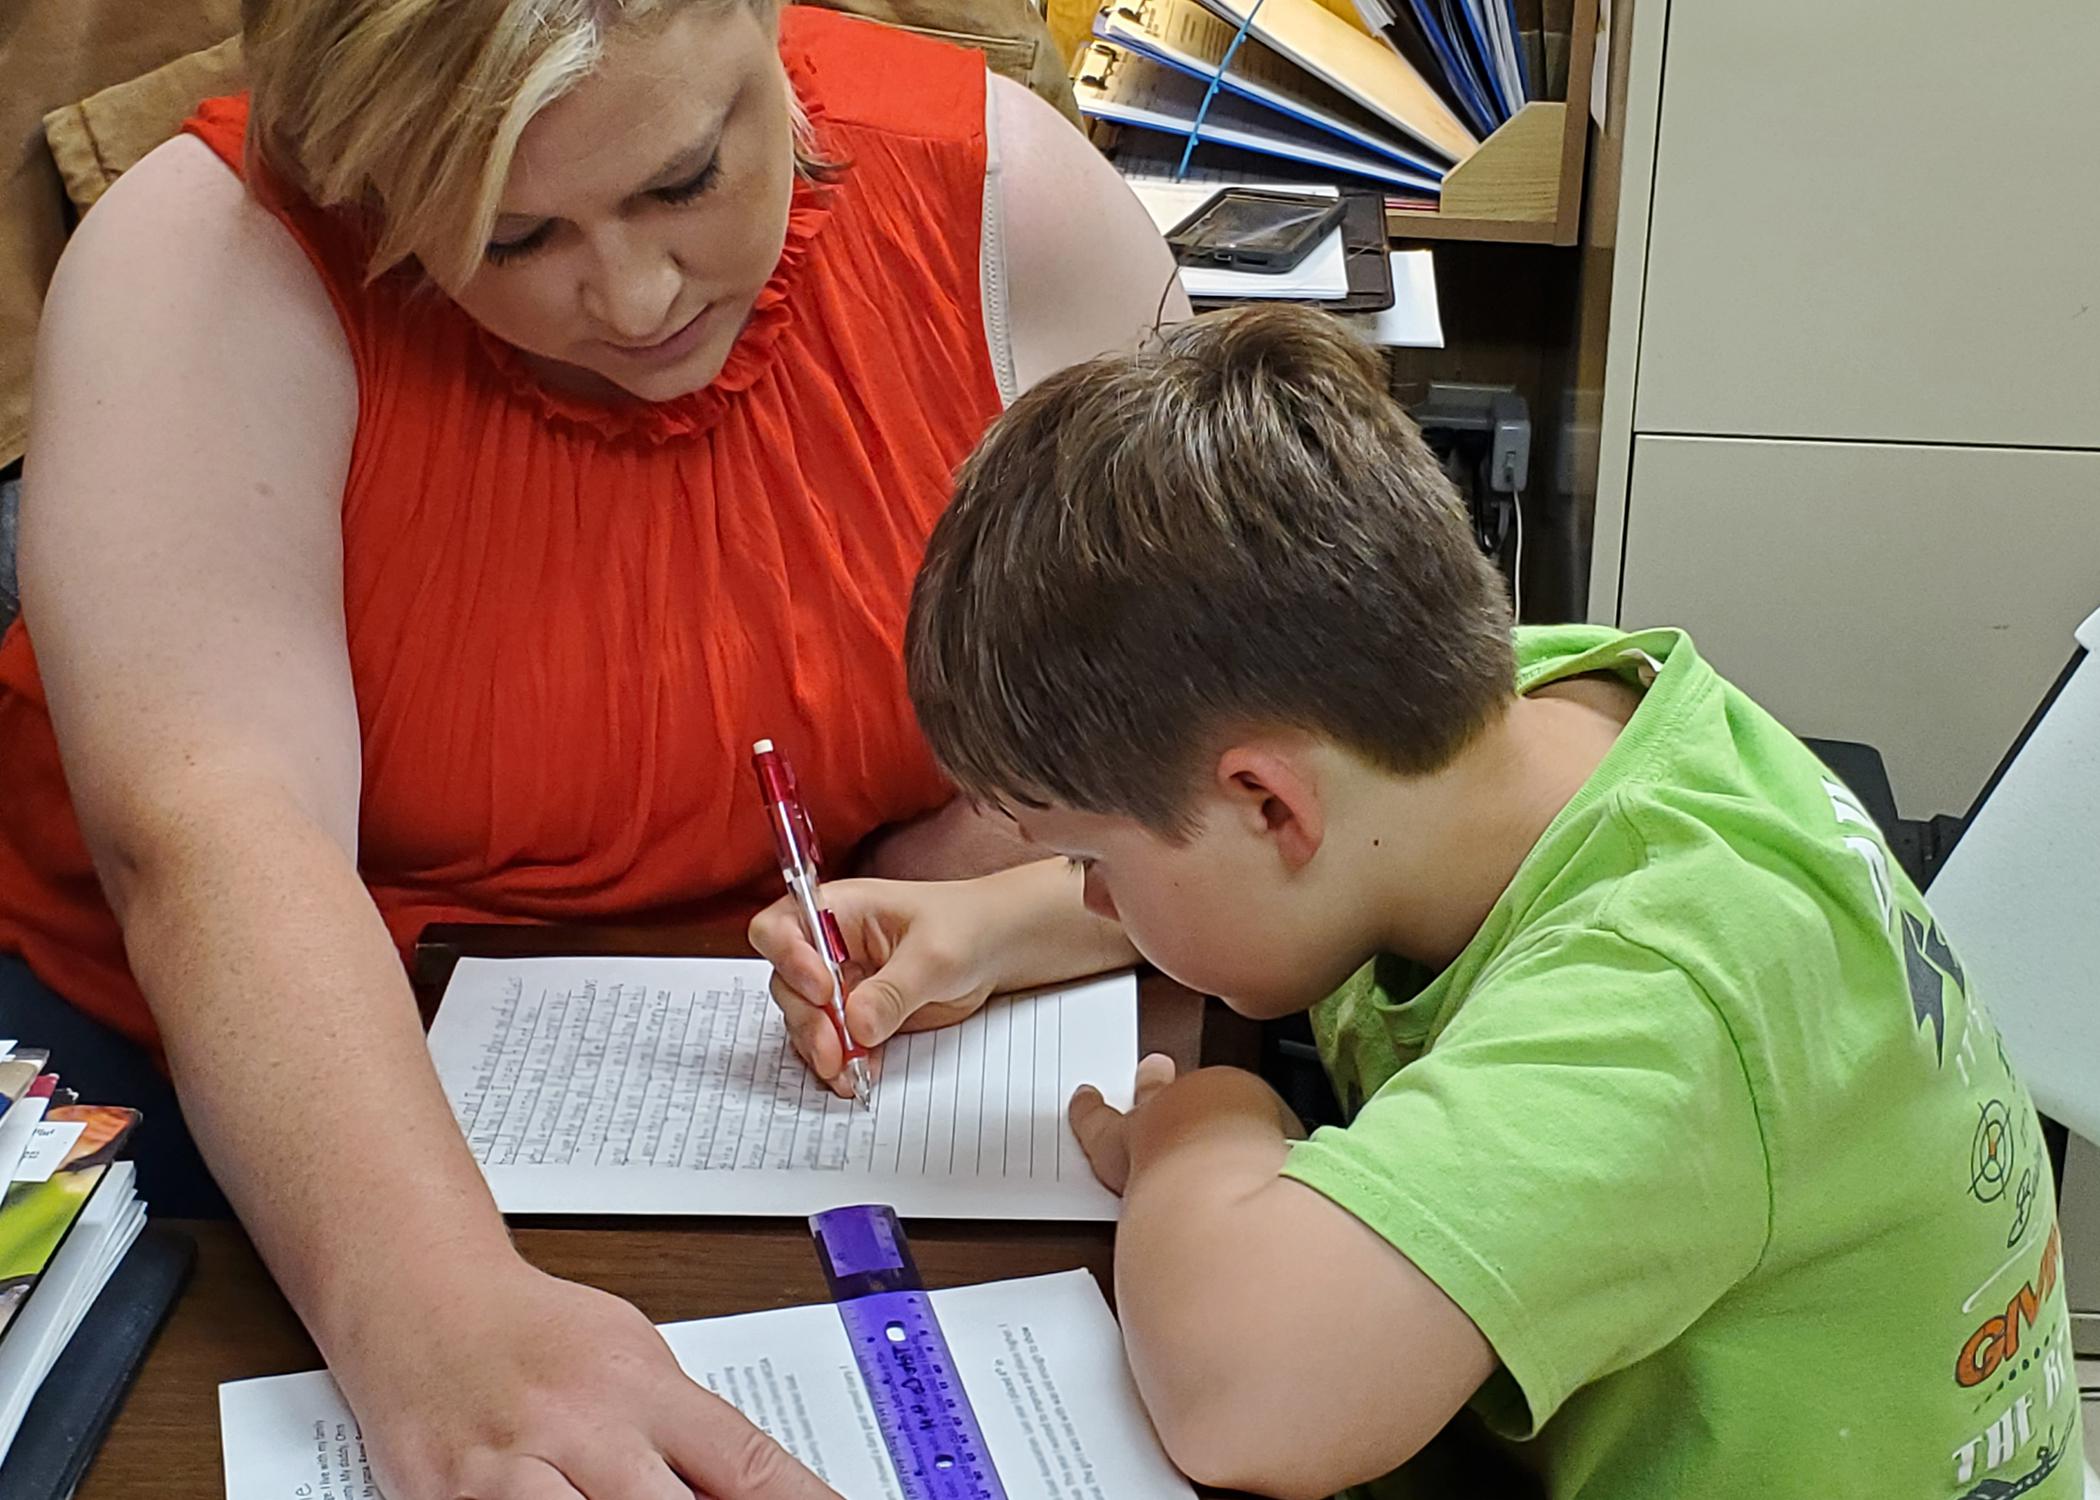 A woman looks on while a young boy writes on a piece of paper.